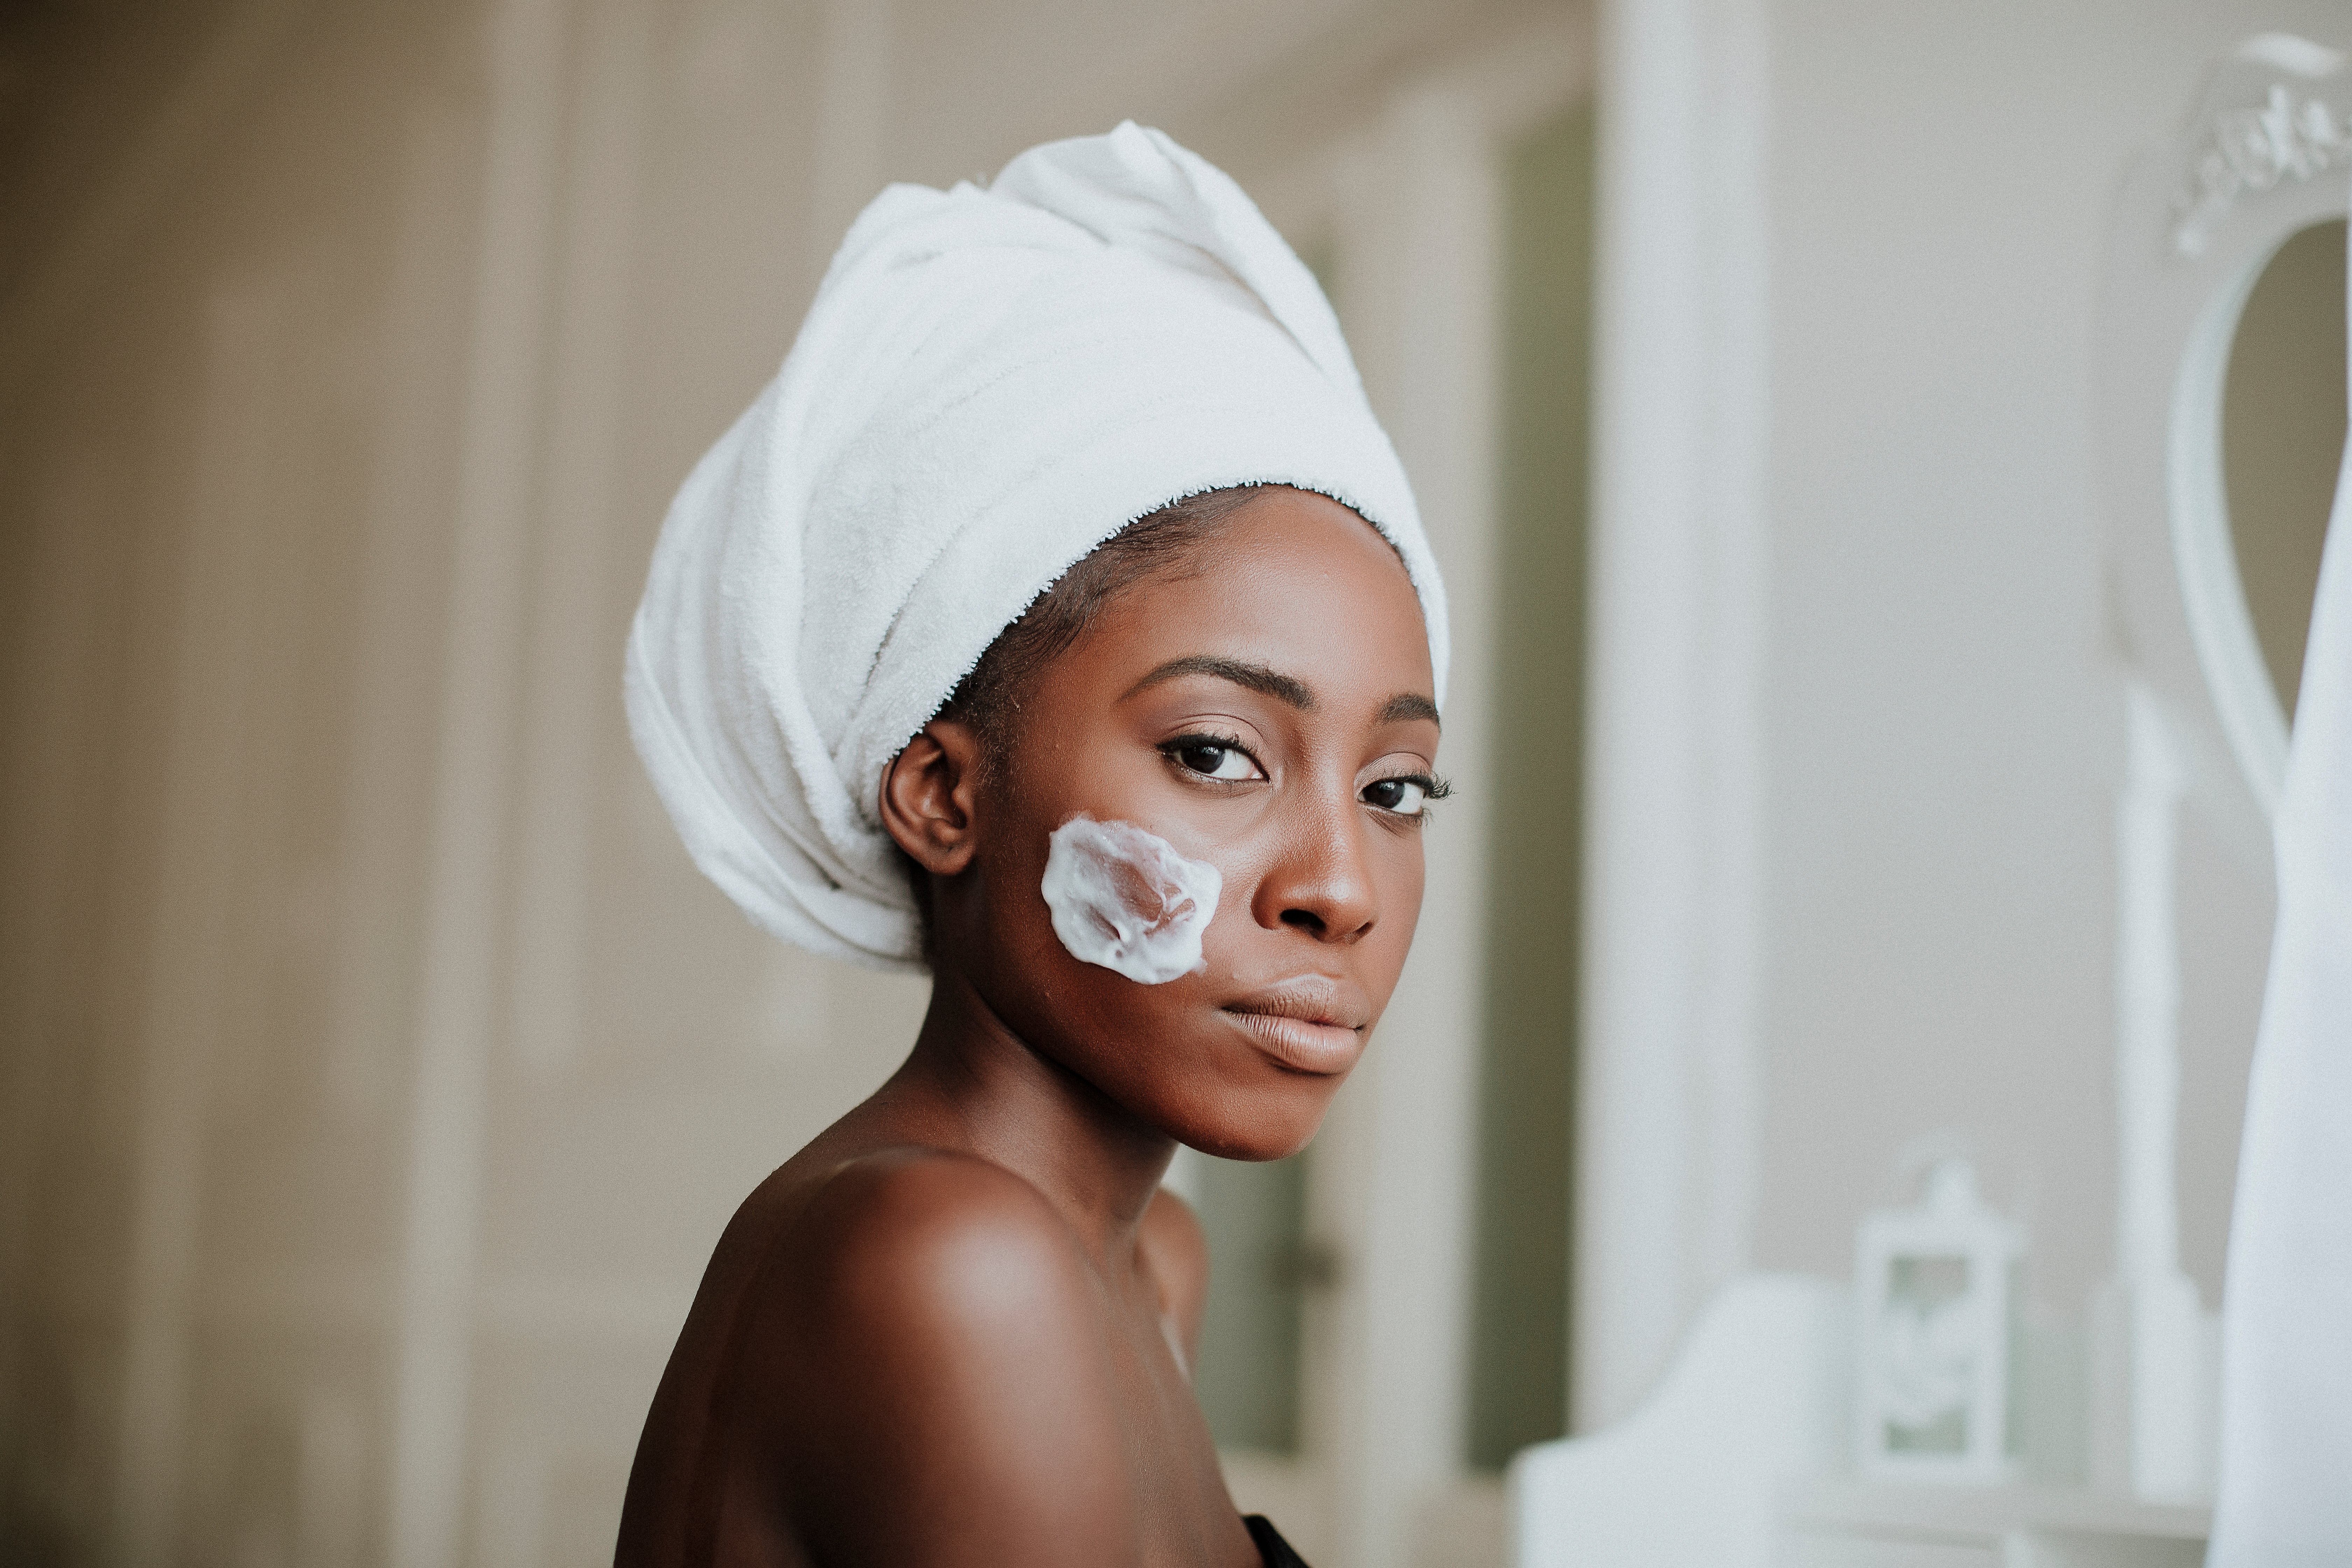  Portrait of beautiful young Afro-American woman taking care of her skin | Photo; Shutterstock